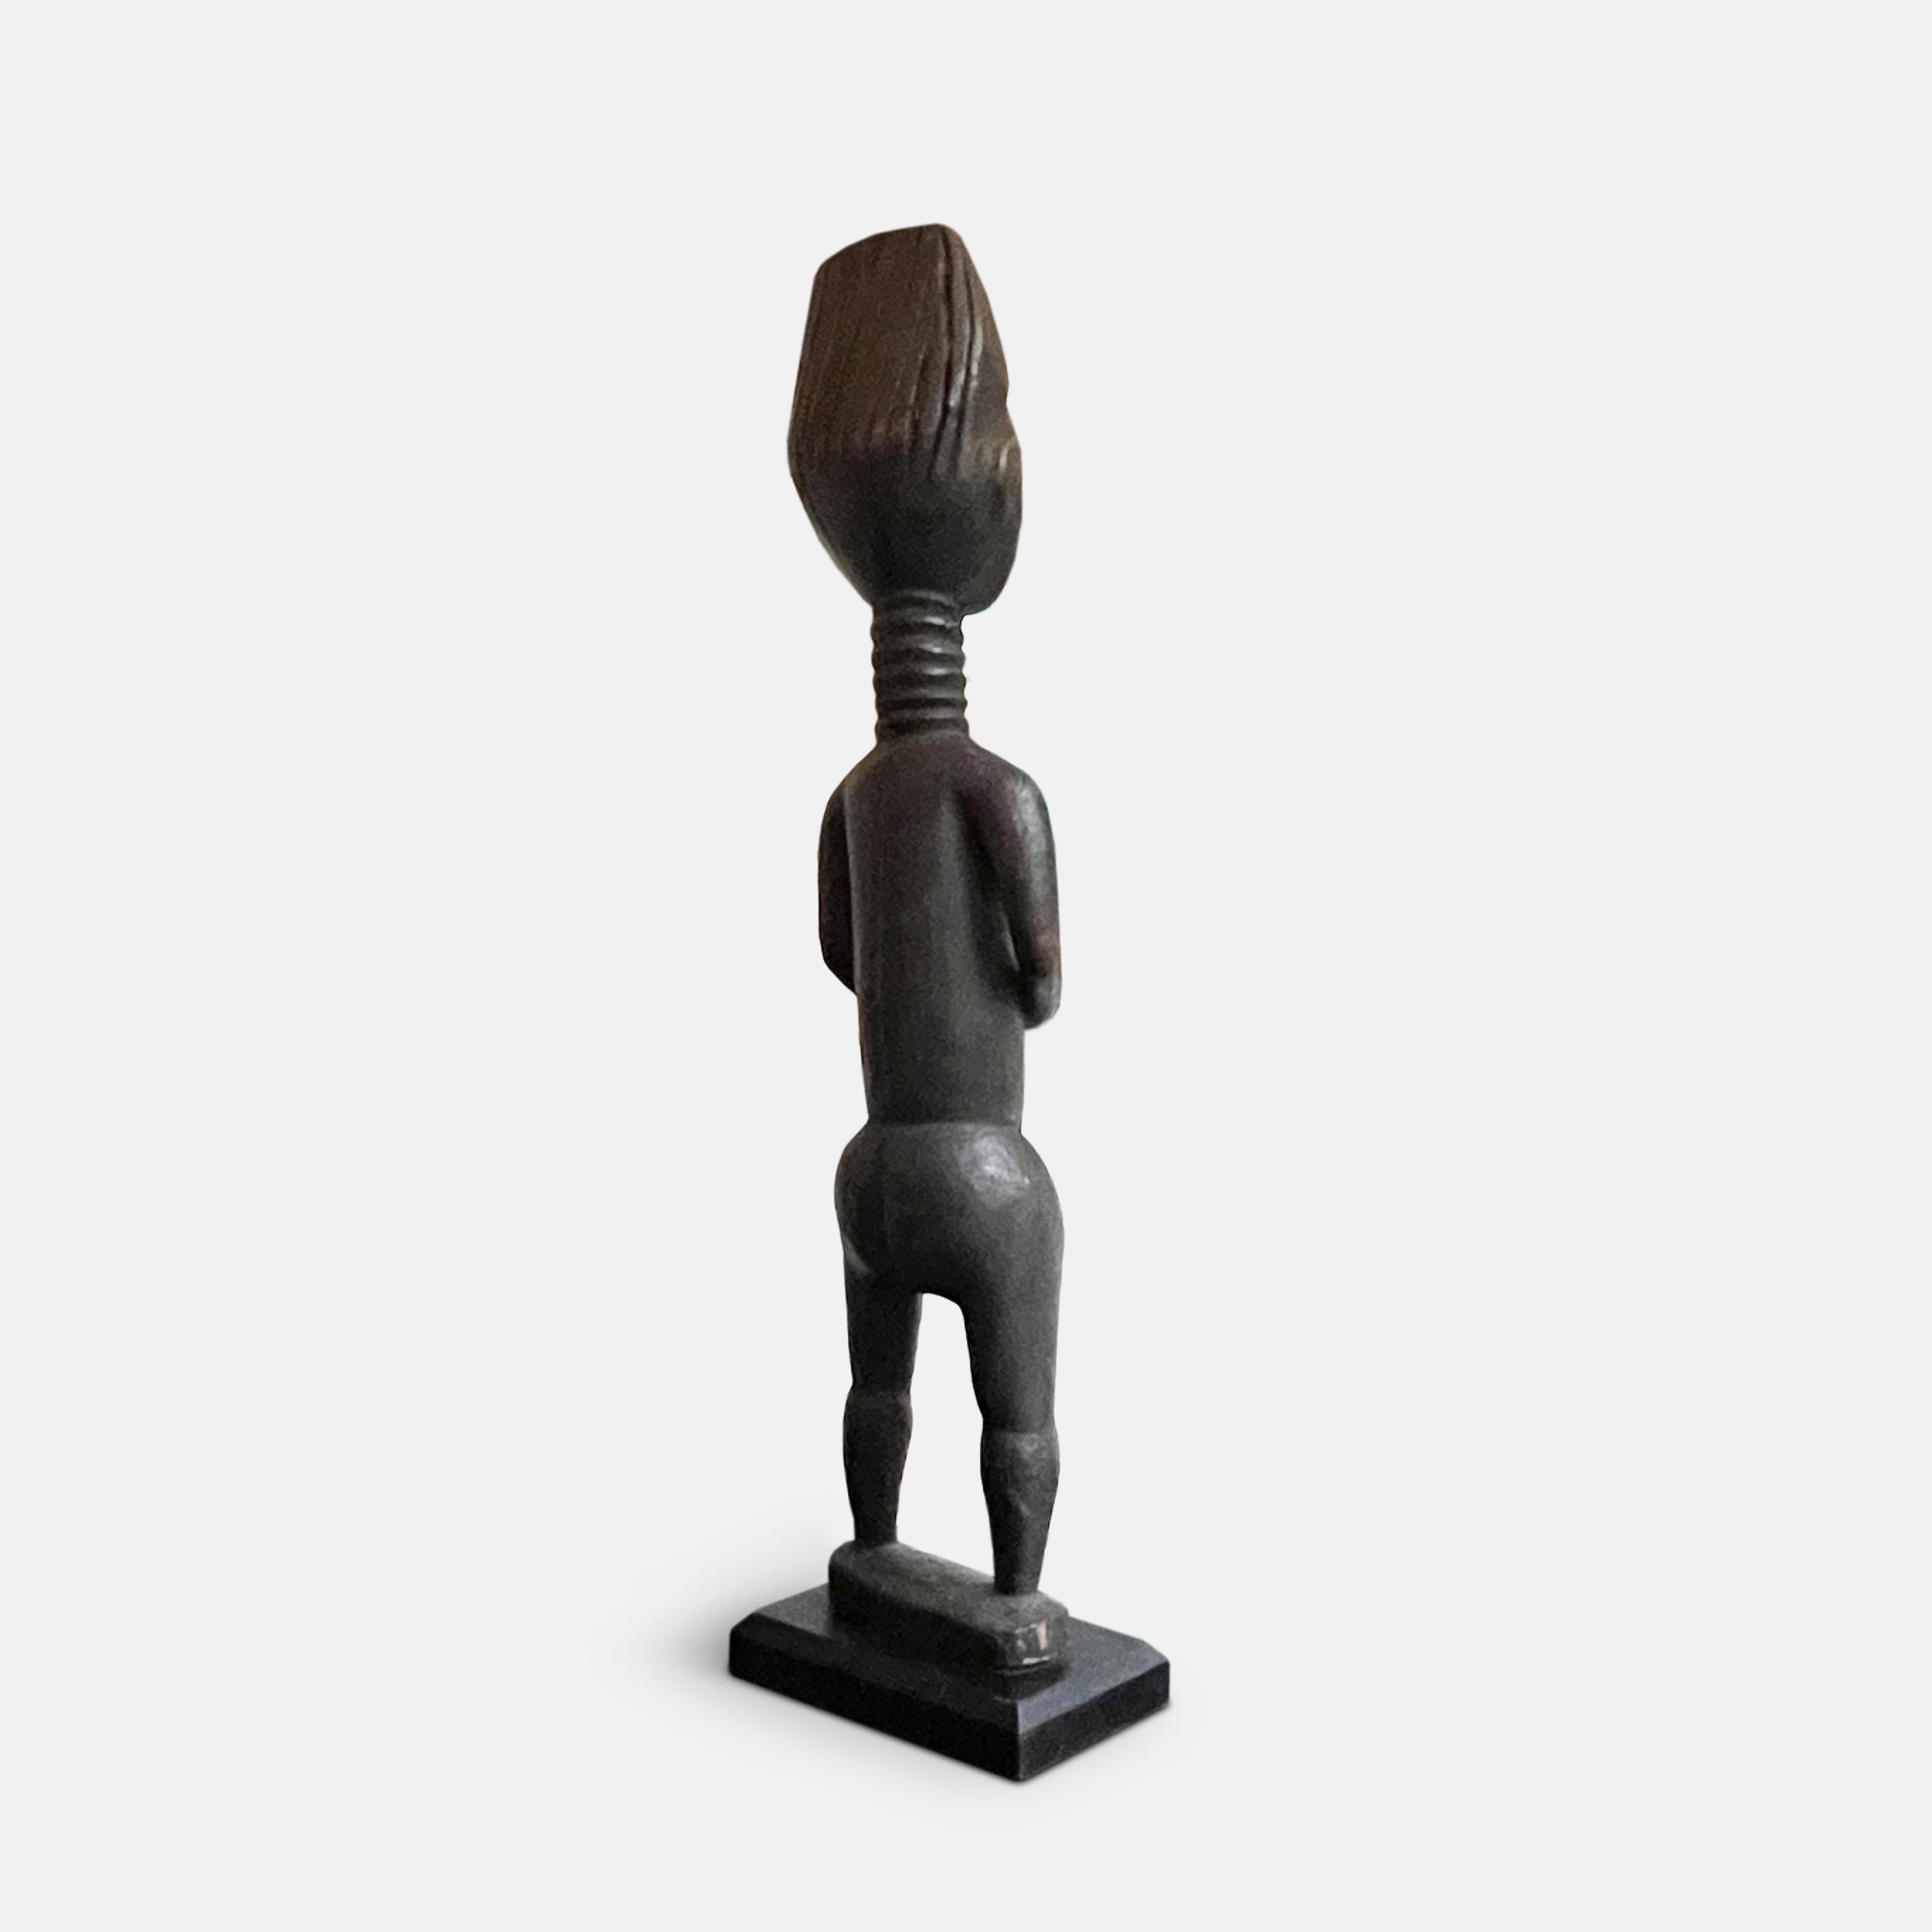 The hard wood of this female Koulango statue, from the Ivory Coast in the early 20th century, has developed a beautiful black patina. With hands resting on the abdomen, and the neck ringed, as is common in Koulango art, the pose and the face of the